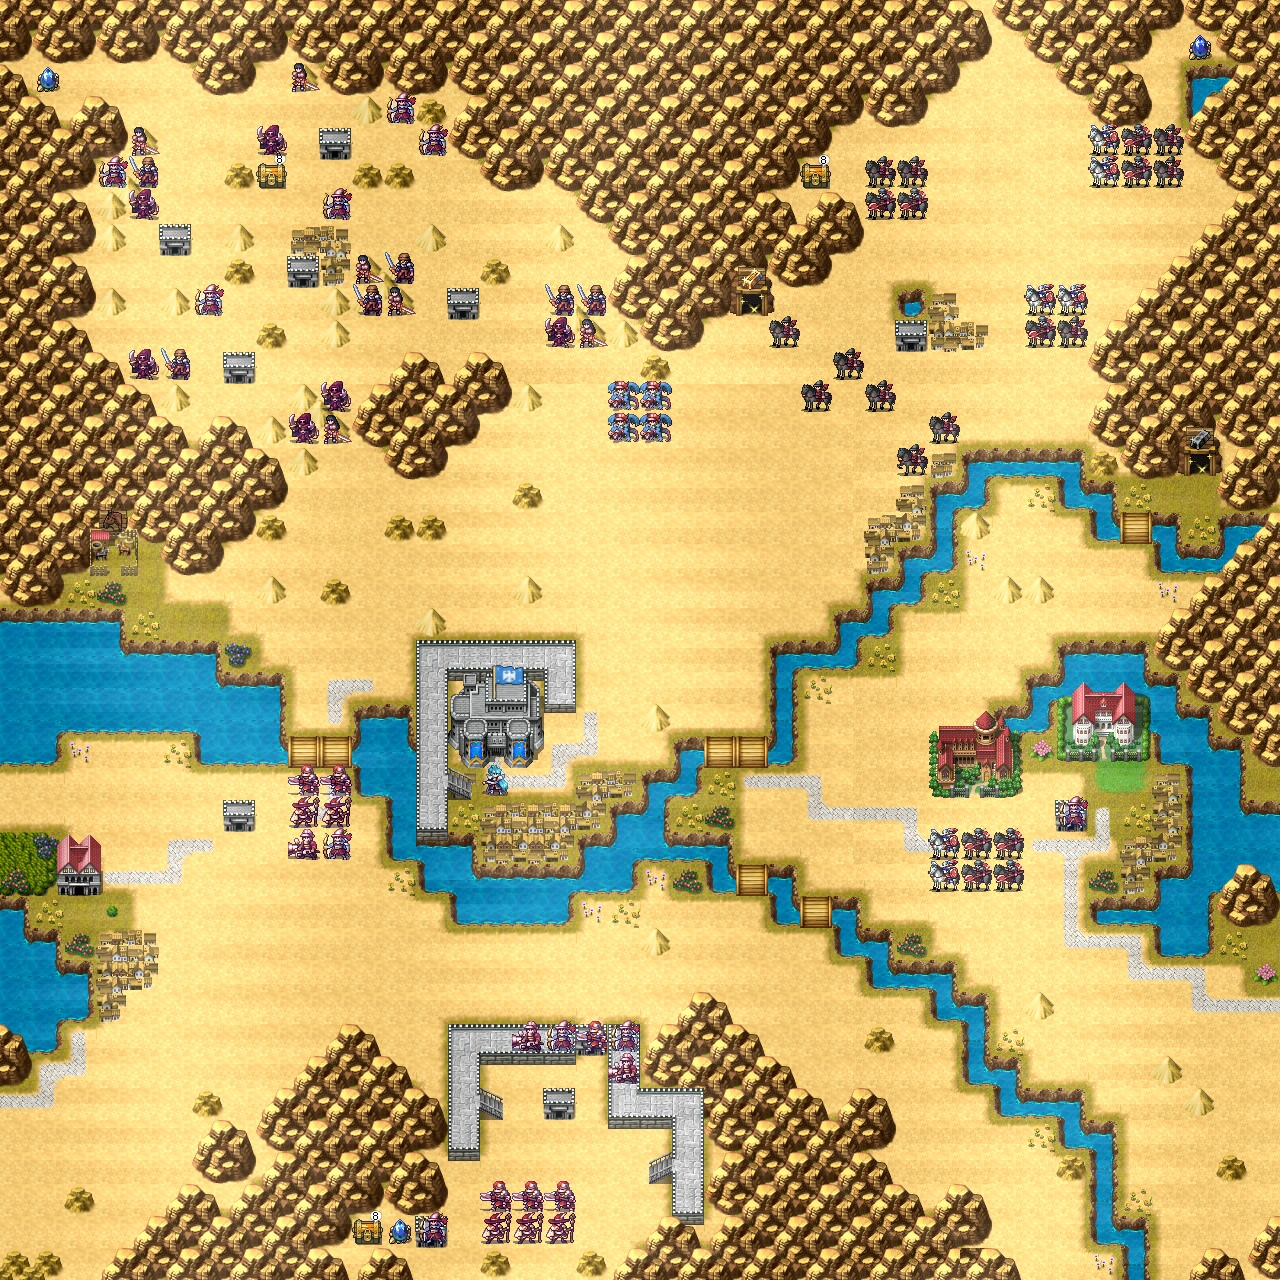 Legends Chapter 6 Map.png